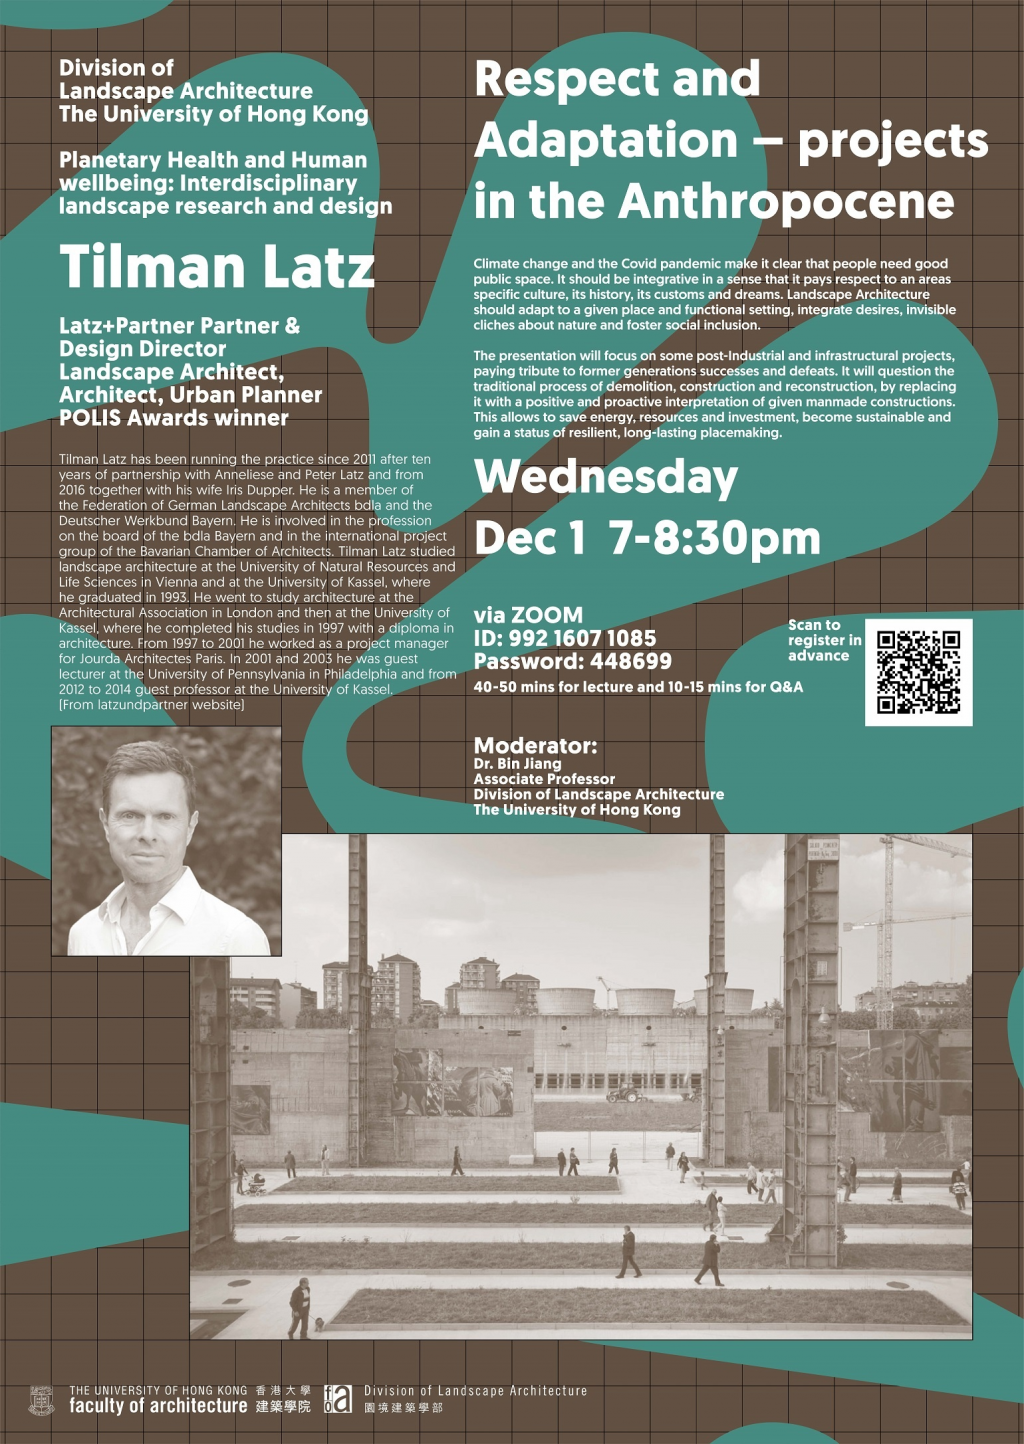 âRespect and Adaptation â projects in the Anthropocene' by Tilman Latz | 1 Dec, 7-8:30pm | Zoom